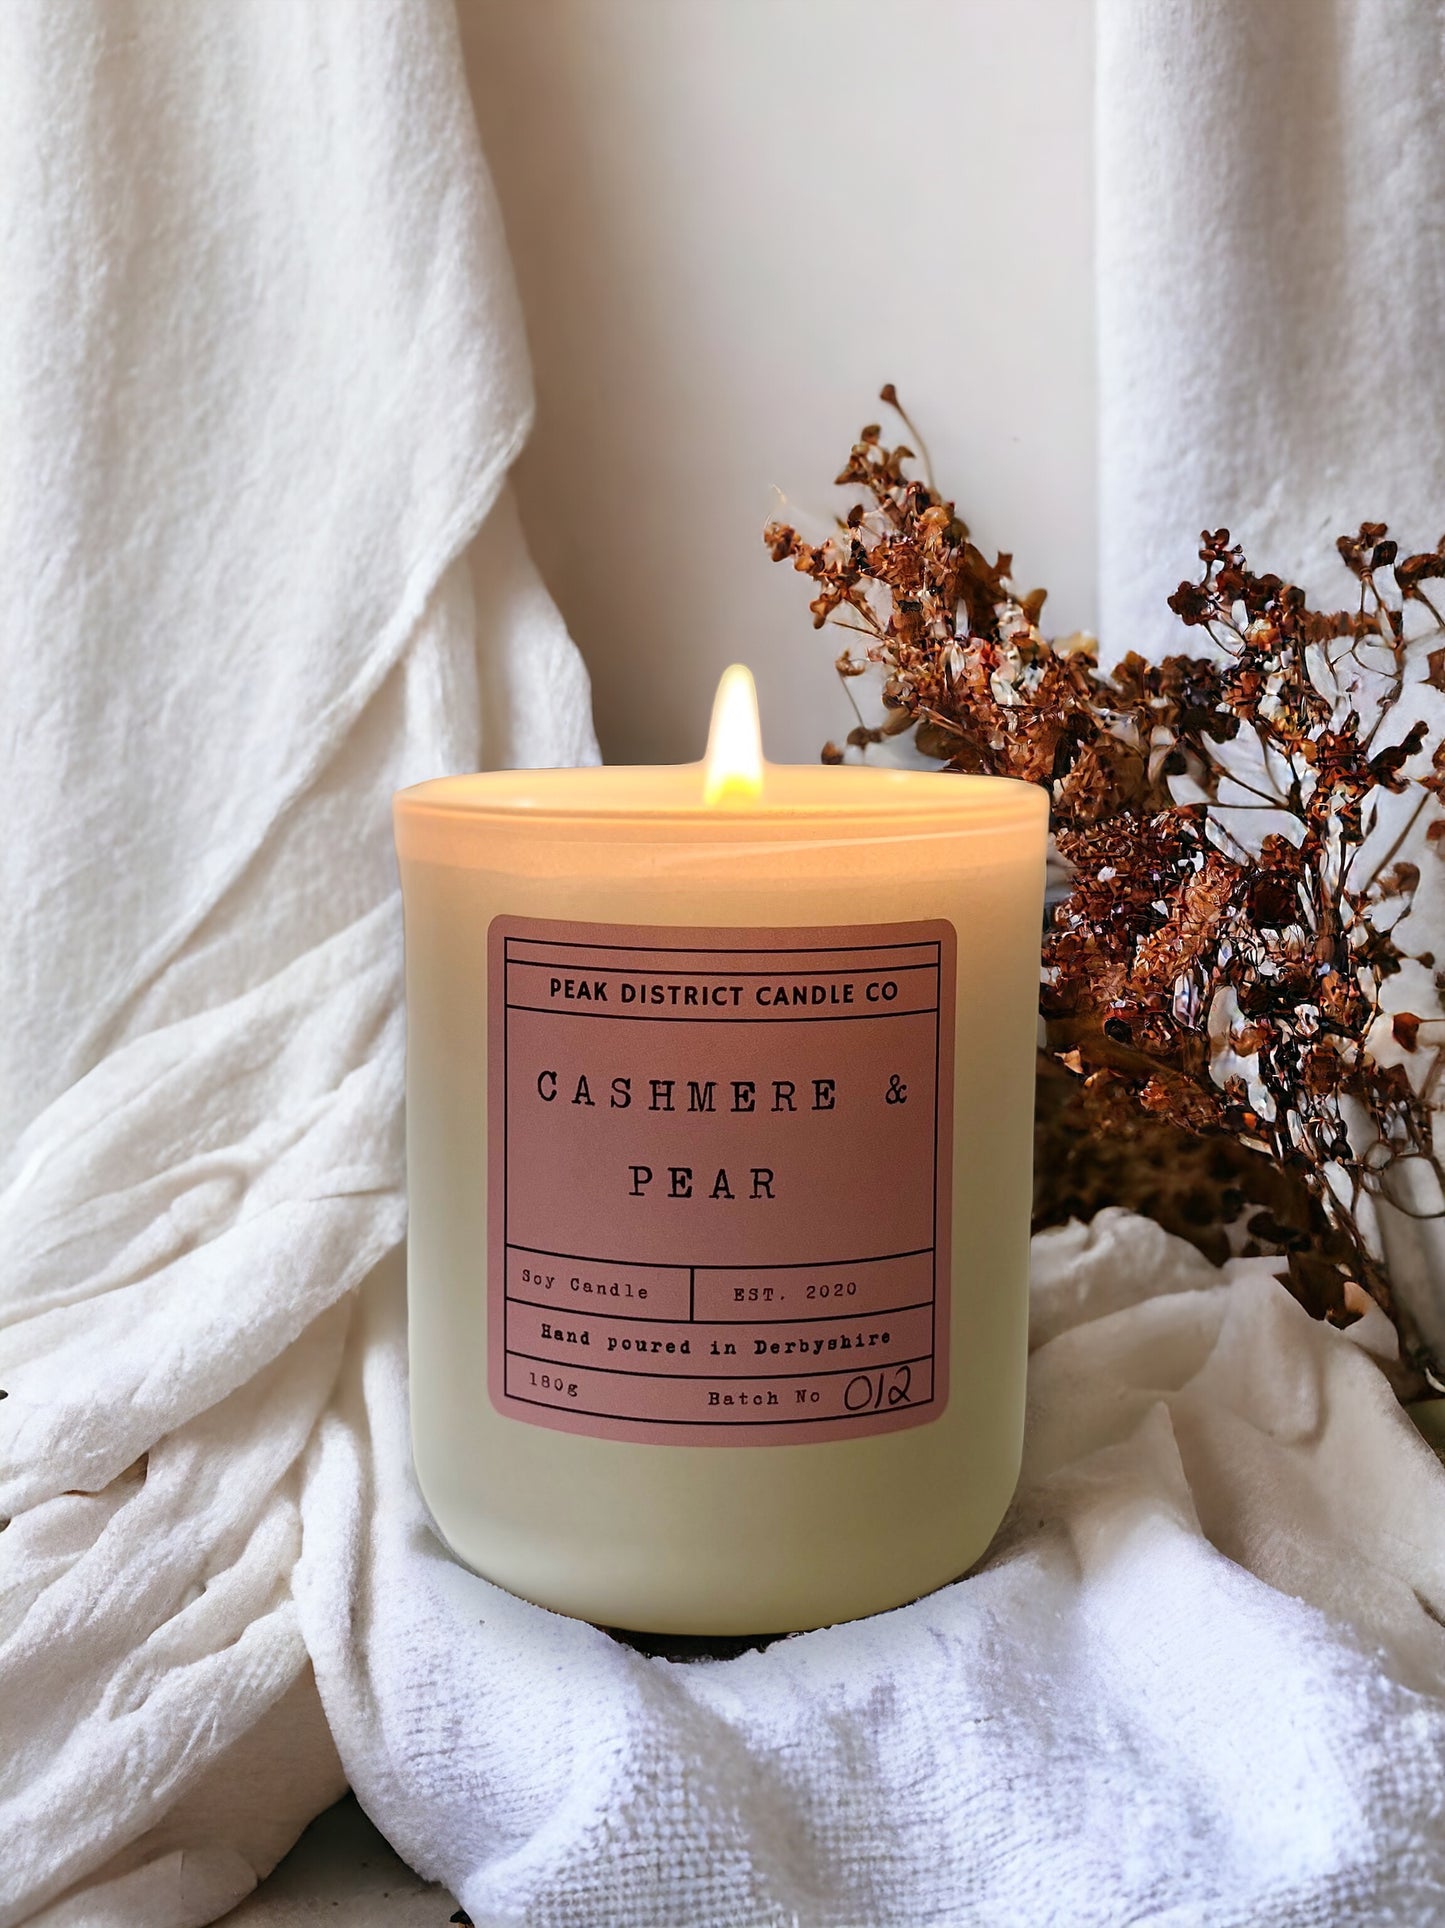 Cashmere & Pear Soy Candle